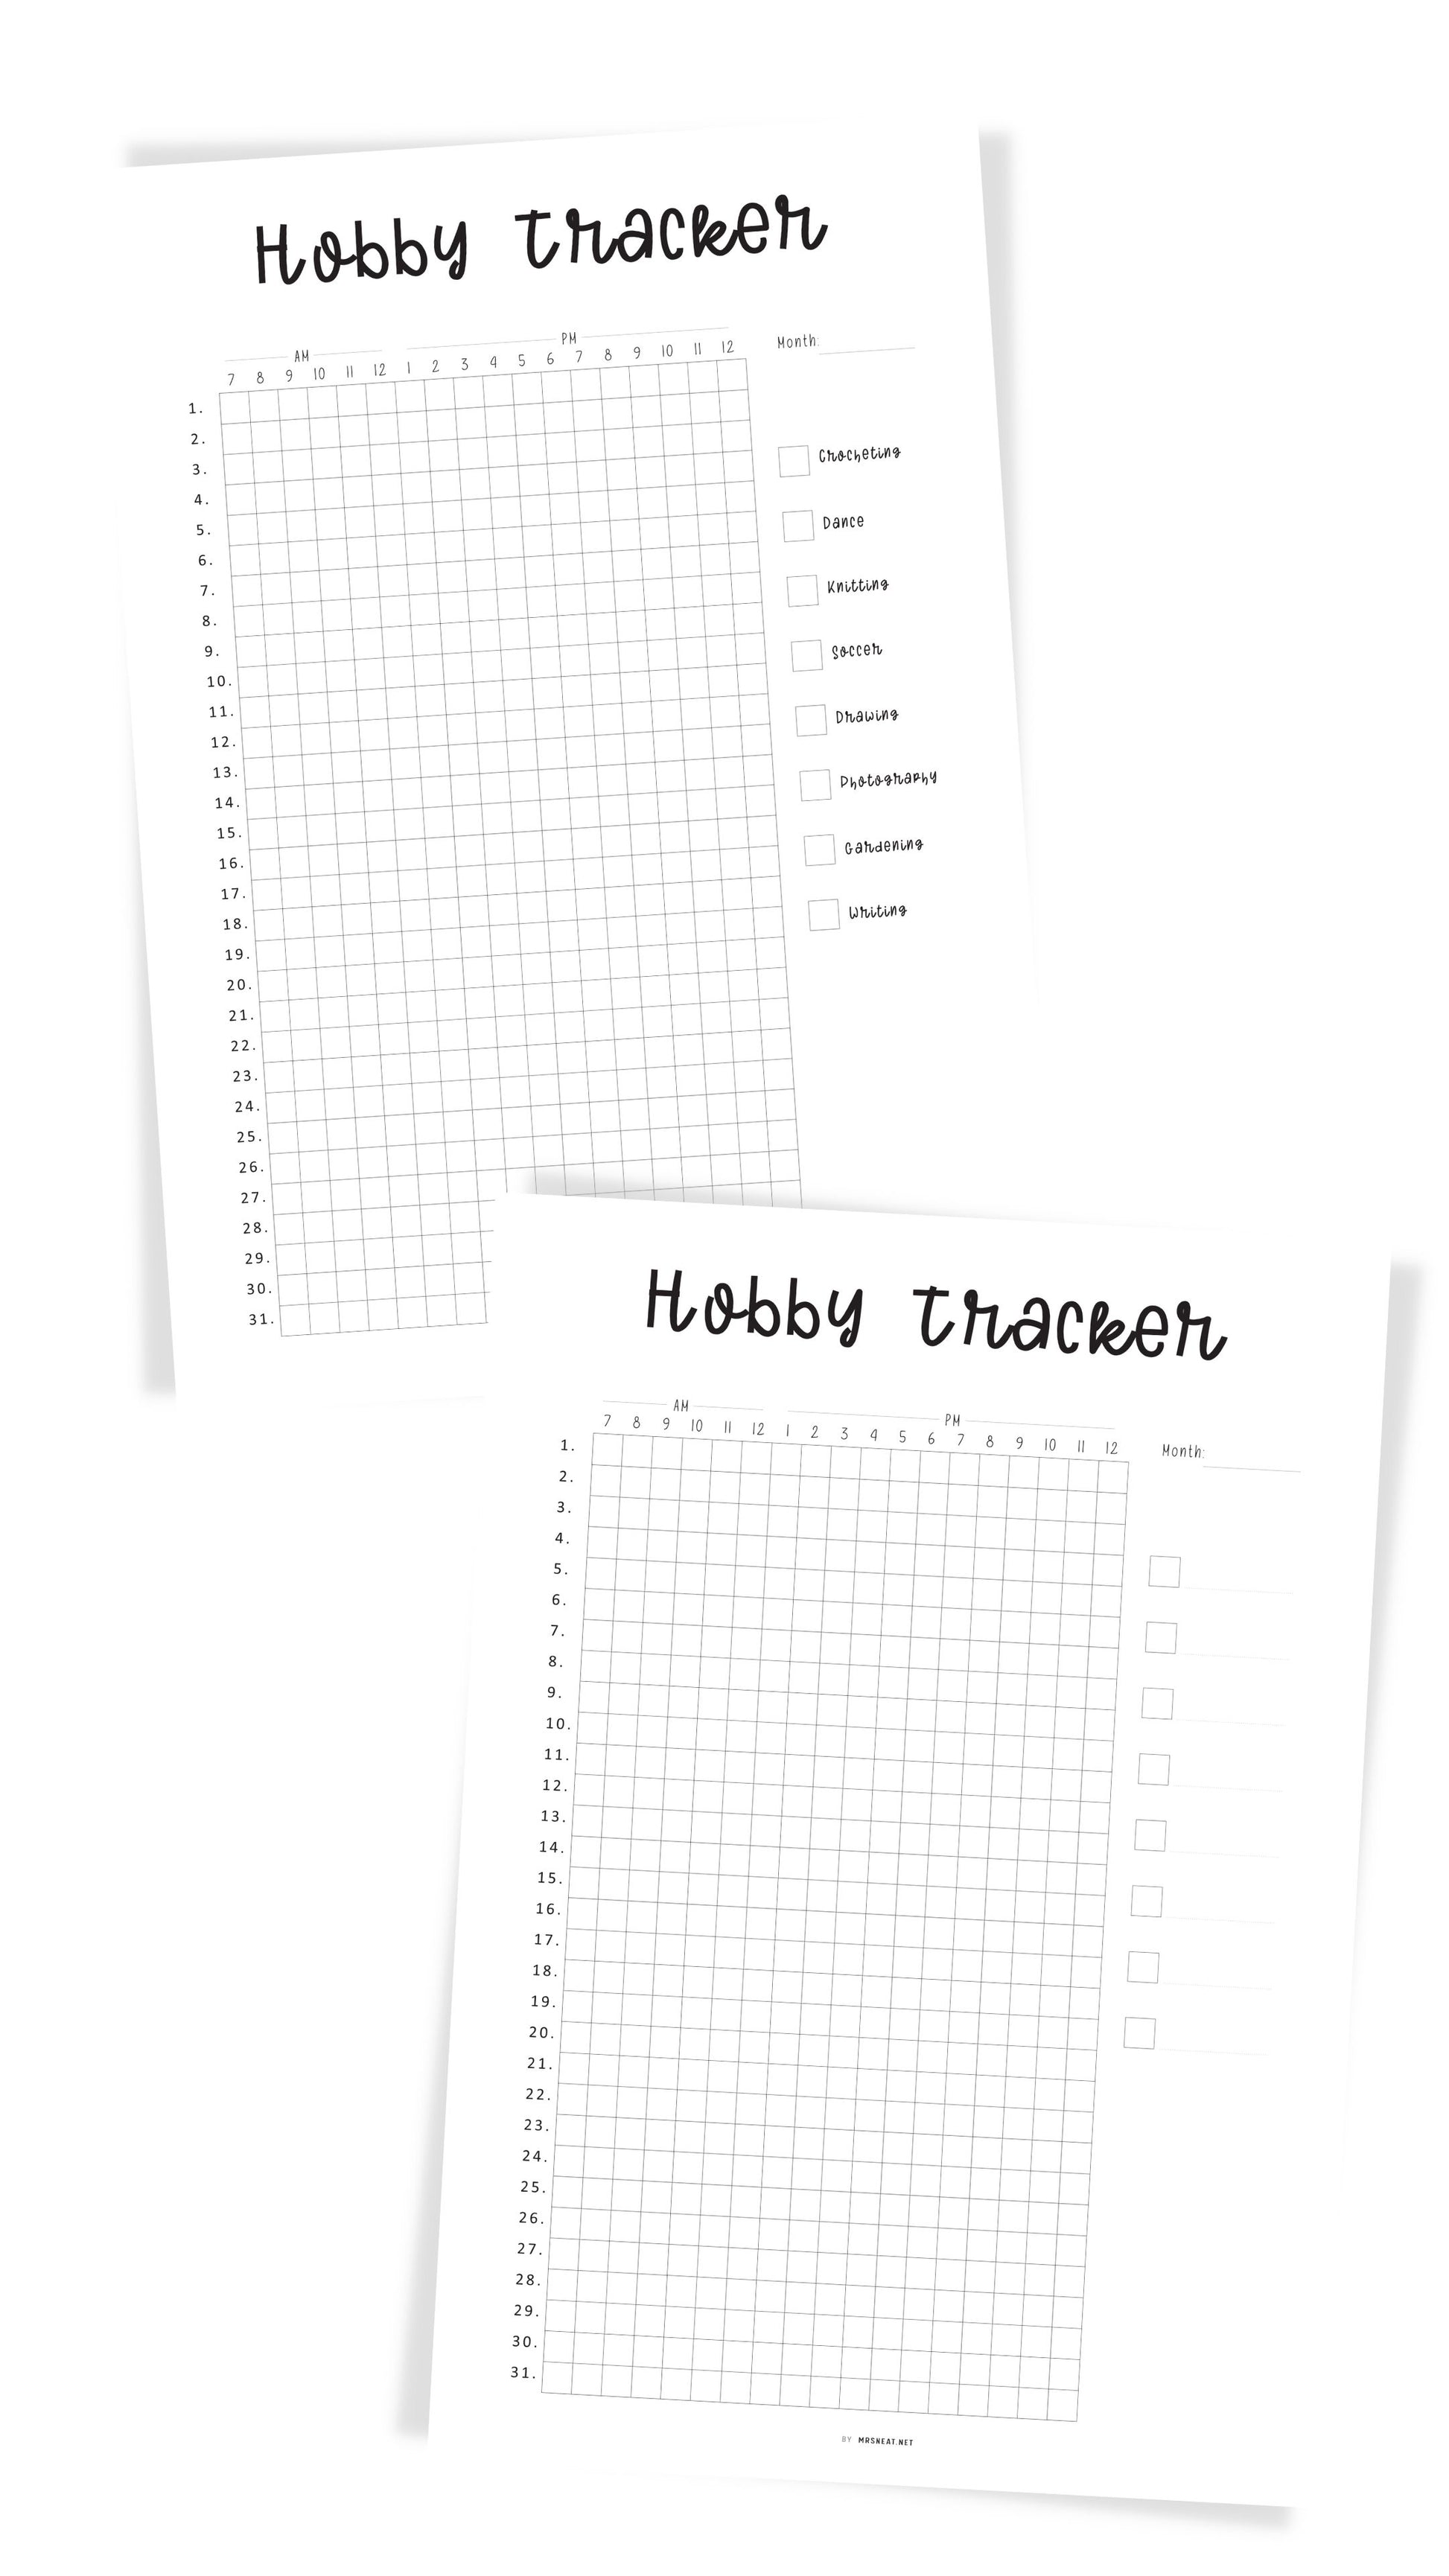 Monthly Hobby Tracker Template printable